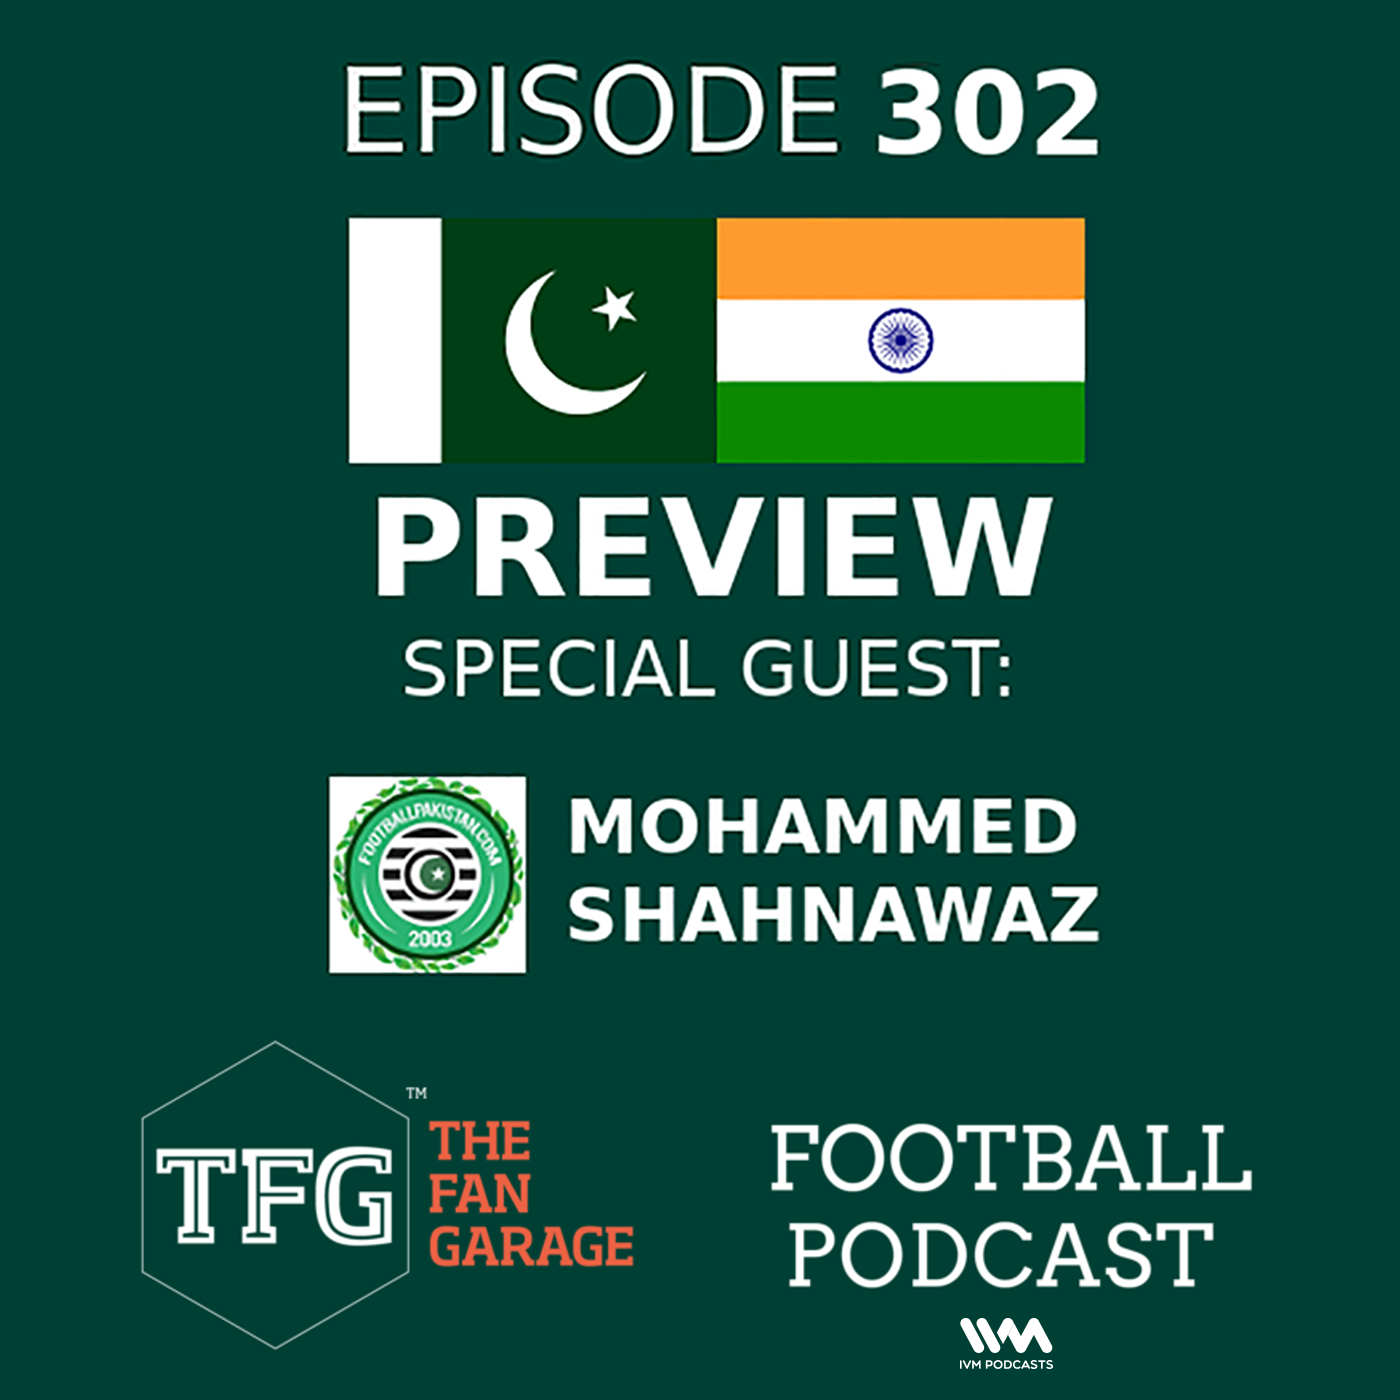 TFG Indian Football Ep. 302: India vs Pakistan Preview (Special Guest Mohammed Shahnawaz)